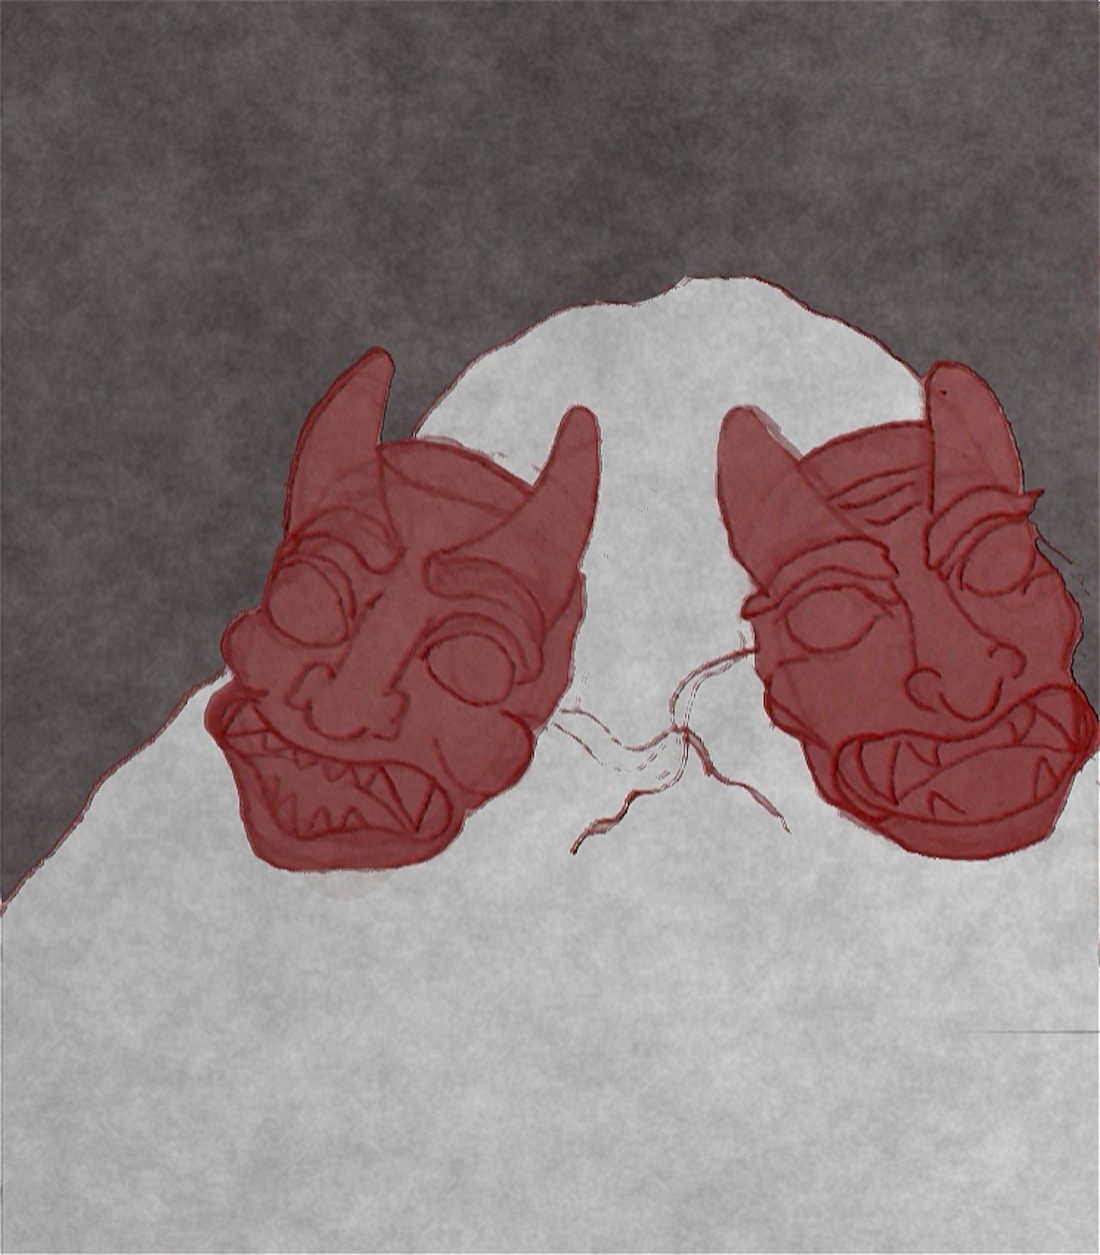 An illustration of two red demon masks sitting in snow, facing away from each other.